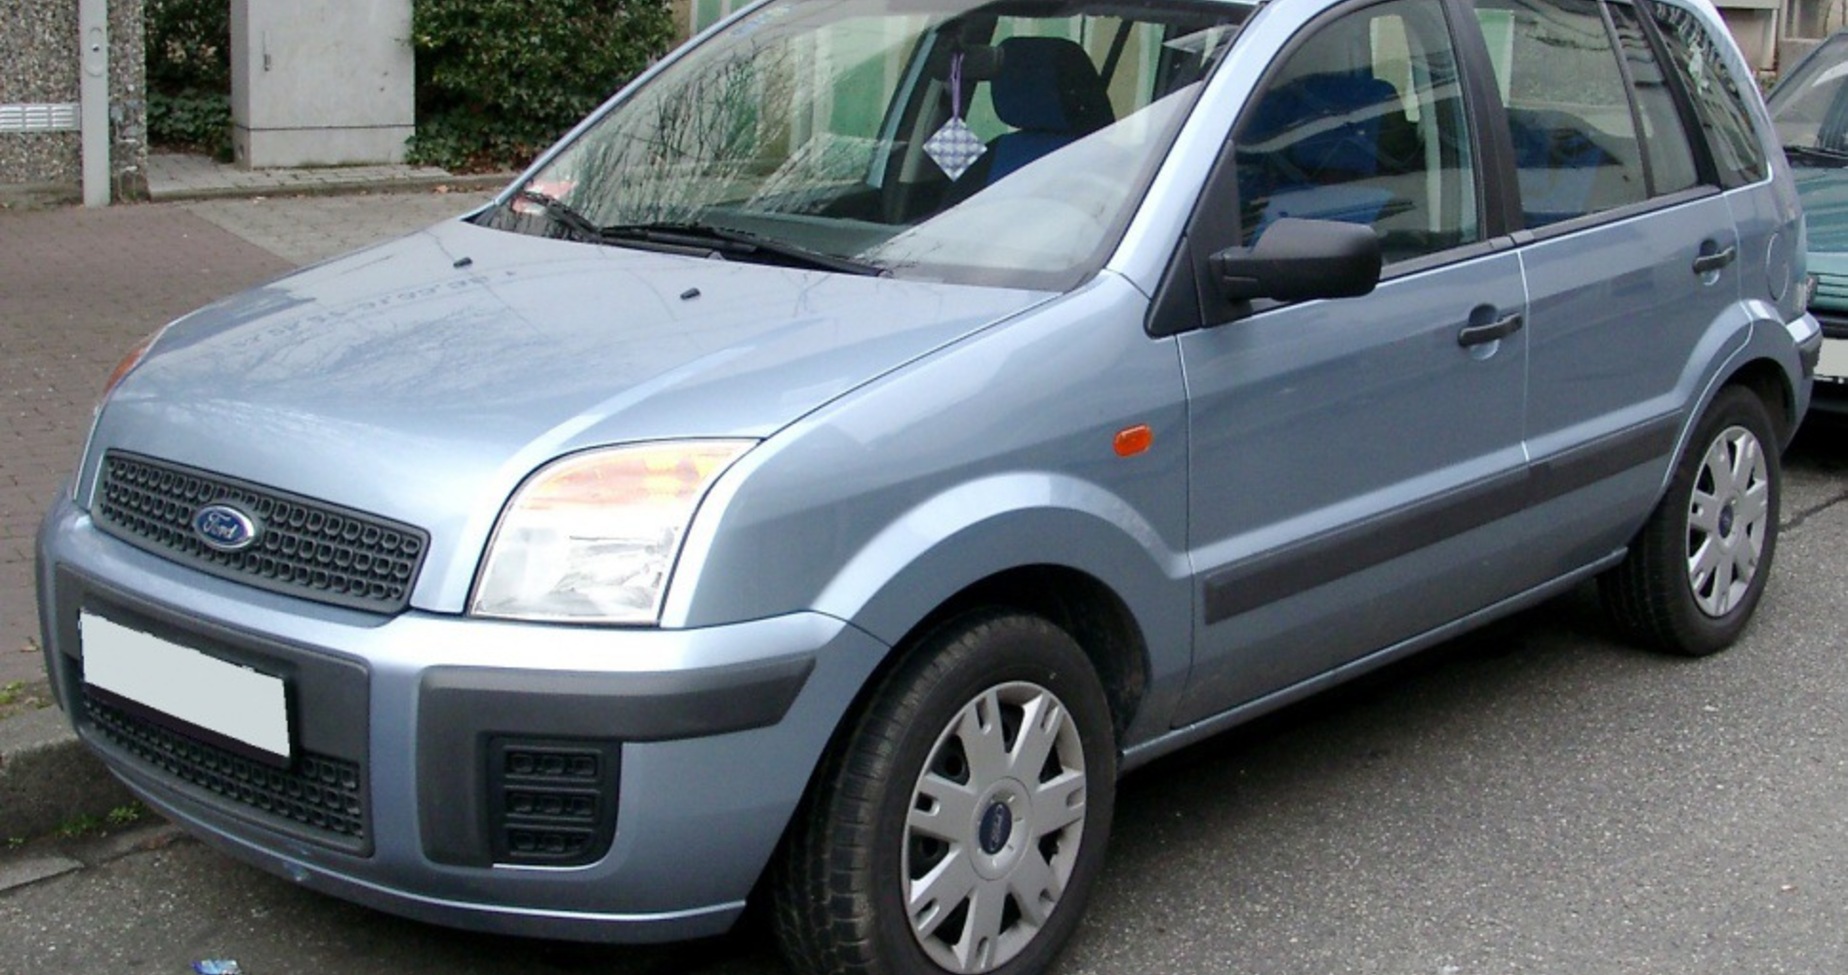 Ford Fusion I (facelift 2005) 1.6 (101 Hp) Automatic 2005, 2006, 2007, 2008, 2009, 2010, 2011, 2012 